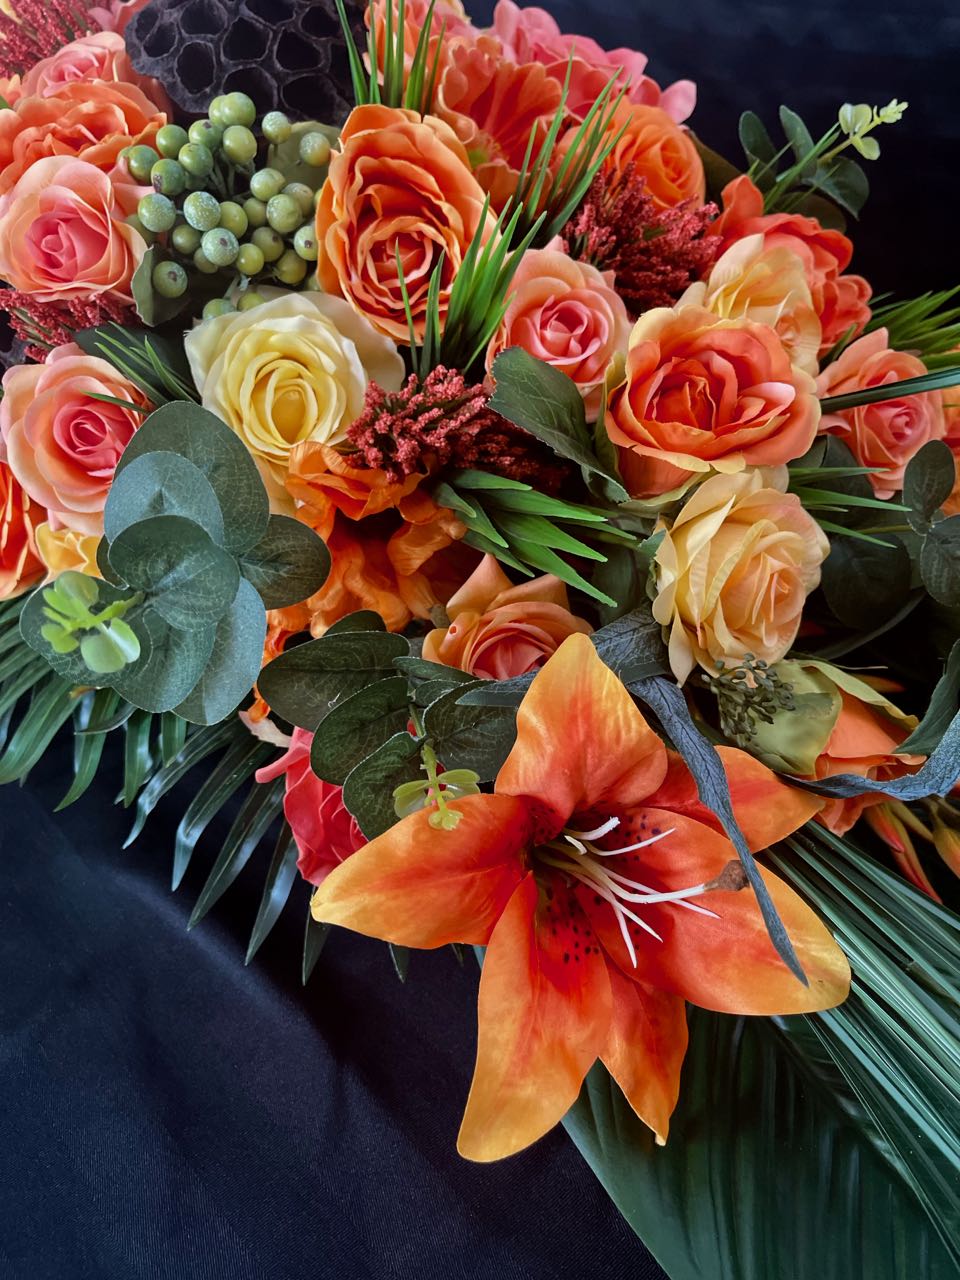 This vivid floral arrangement, a tribute to the fiery hues of a summer sunset, juxtaposes the lushness of palm leaves, eucalyptus sprigs, and tall grasses with the vividness of tiger lillies, green hypercium berries, and an array of roses in sundry shades of orange and brown-hued honeycombs. This arrangement is four feet long and 16 inches wide.